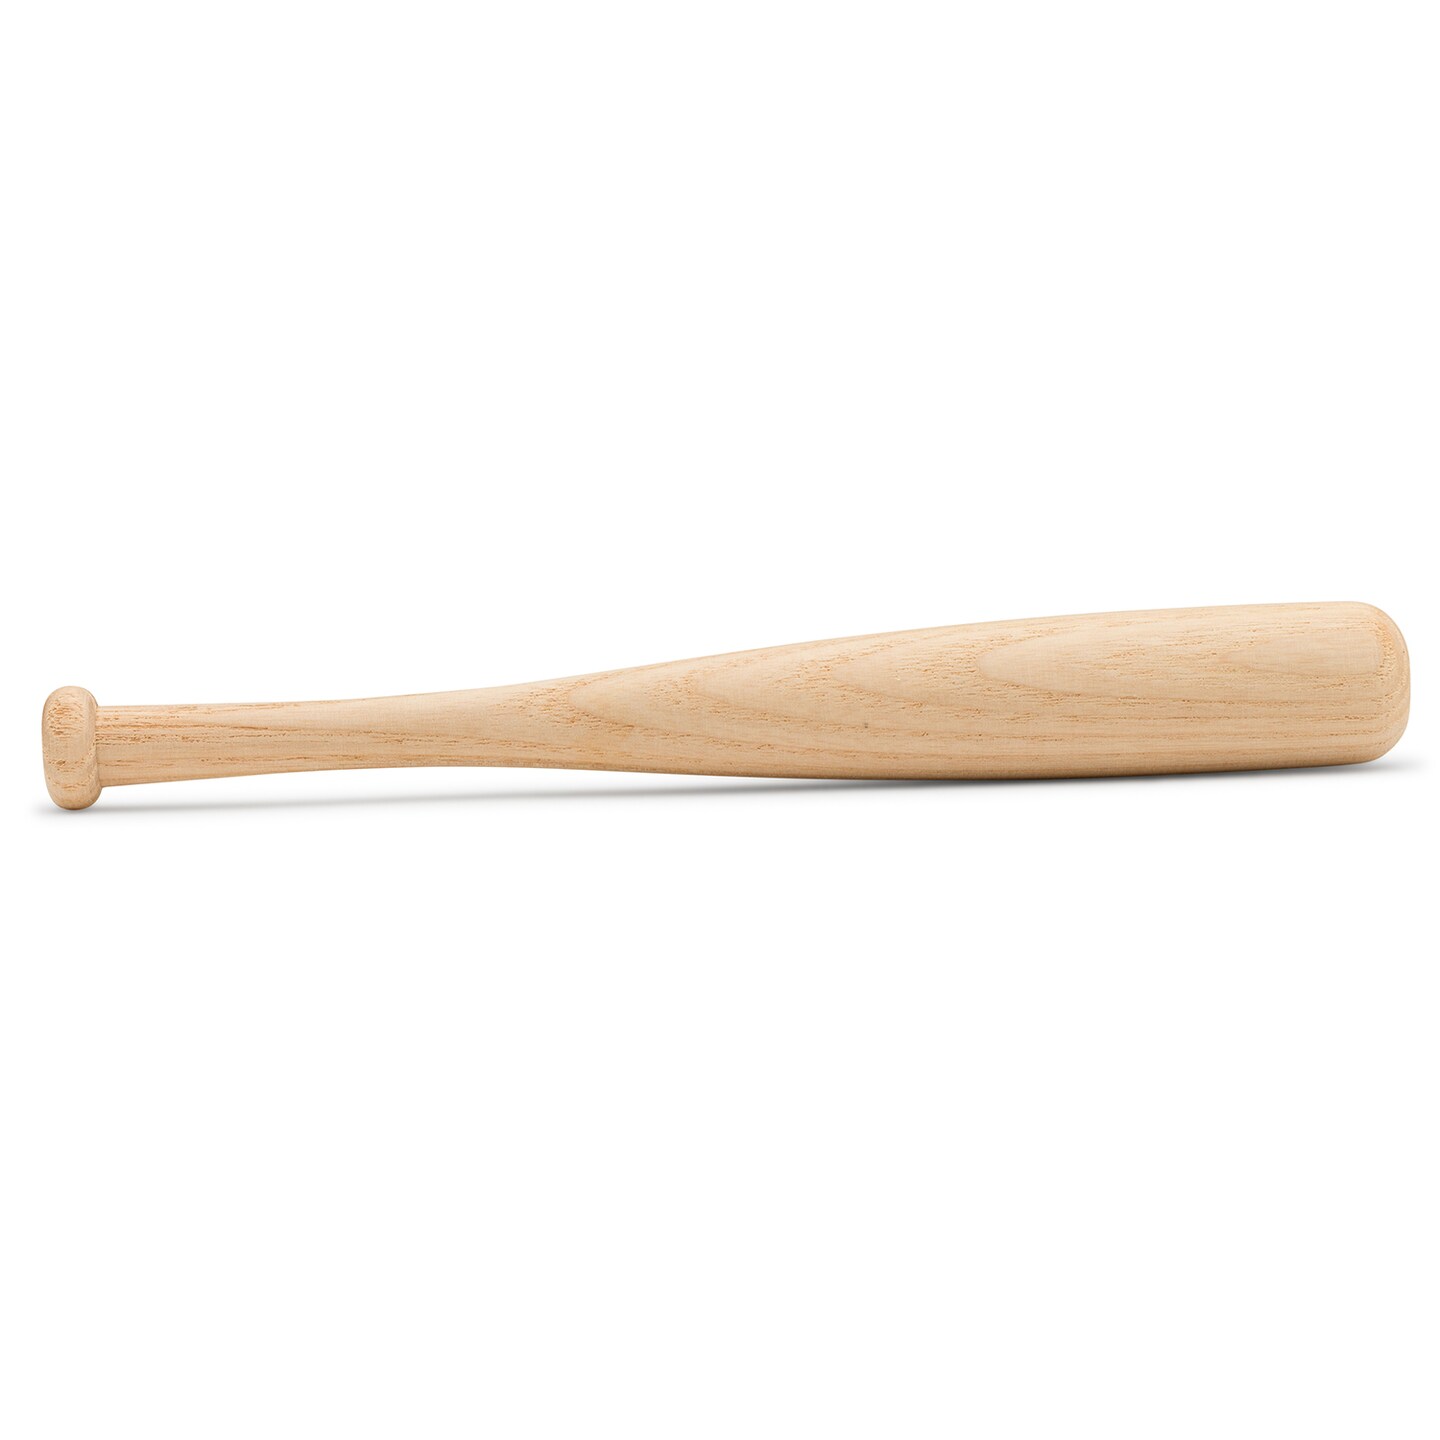 Wood Craft Bat, Multiple Sizes Available | Woodpeckers